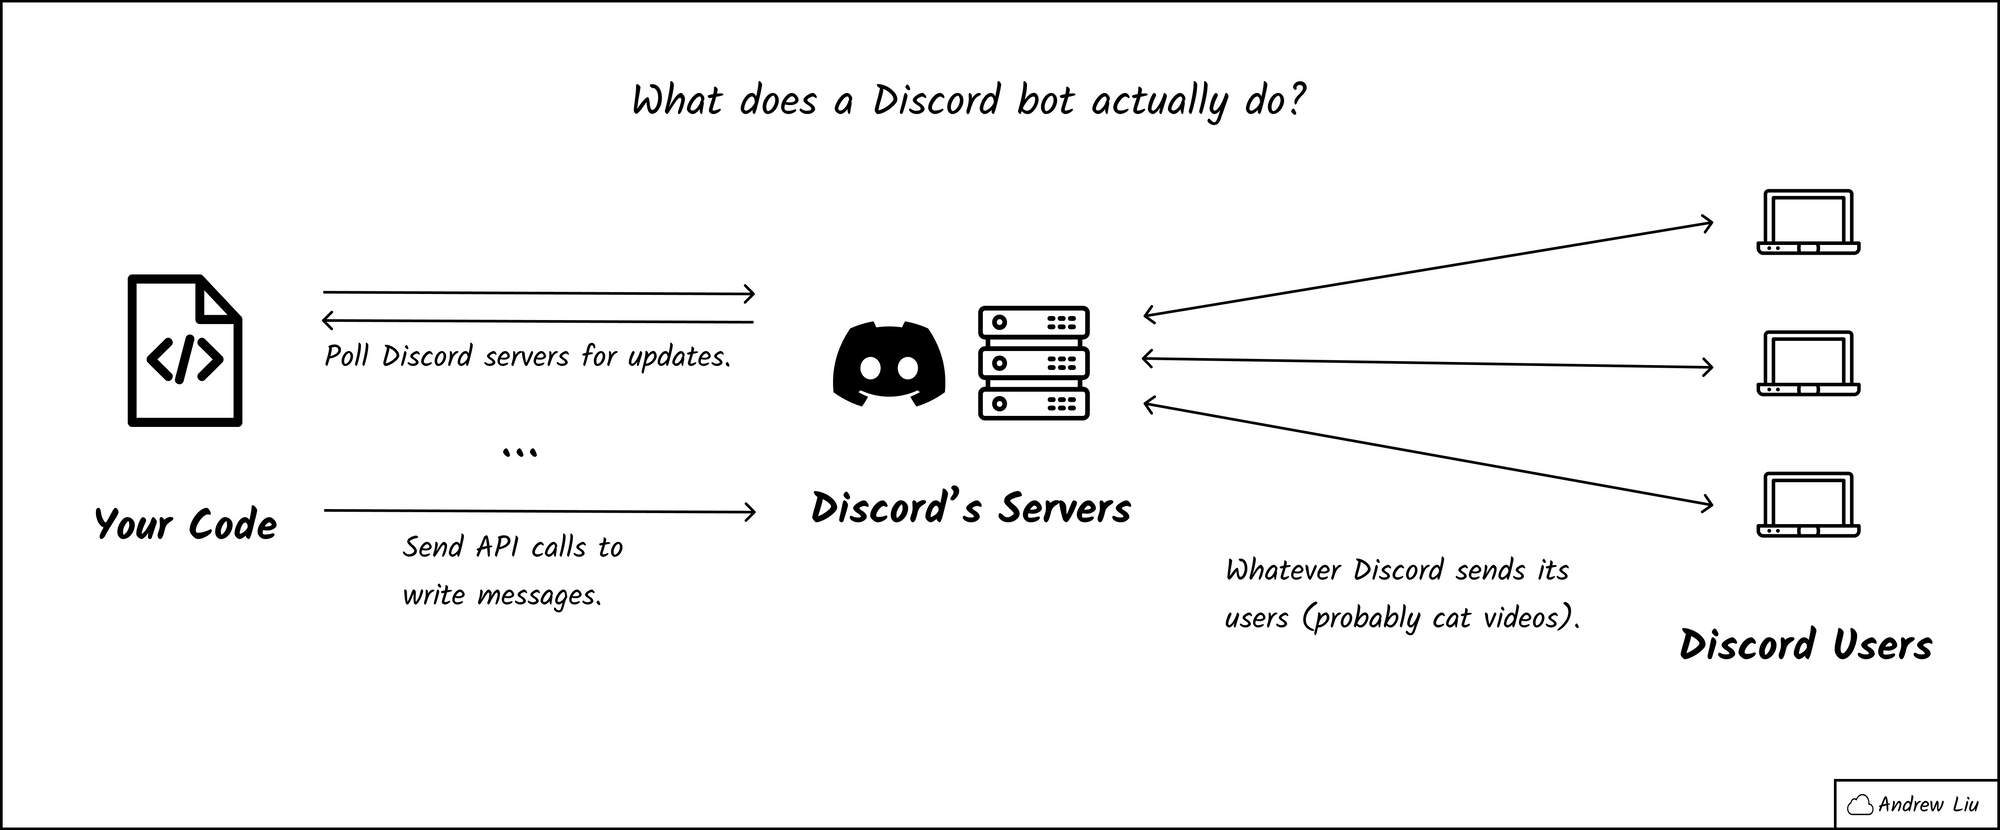 Writing a Discord Chatbot With GPT-3